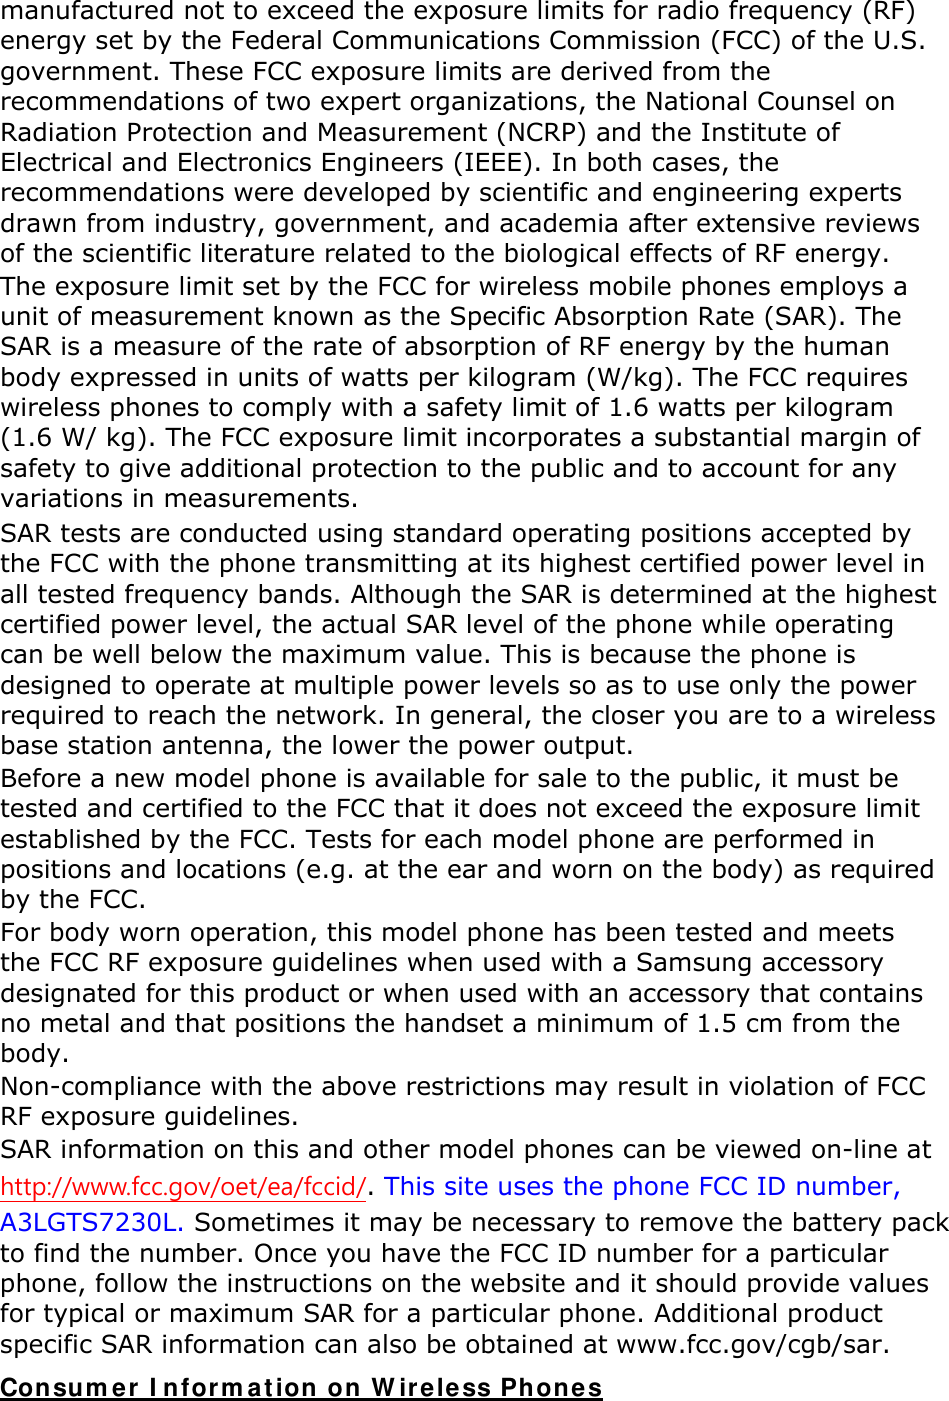 manufactured not to exceed the exposure limits for radio frequency (RF) energy set by the Federal Communications Commission (FCC) of the U.S. government. These FCC exposure limits are derived from the recommendations of two expert organizations, the National Counsel on Radiation Protection and Measurement (NCRP) and the Institute of Electrical and Electronics Engineers (IEEE). In both cases, the recommendations were developed by scientific and engineering experts drawn from industry, government, and academia after extensive reviews of the scientific literature related to the biological effects of RF energy. The exposure limit set by the FCC for wireless mobile phones employs a unit of measurement known as the Specific Absorption Rate (SAR). The SAR is a measure of the rate of absorption of RF energy by the human body expressed in units of watts per kilogram (W/kg). The FCC requires wireless phones to comply with a safety limit of 1.6 watts per kilogram (1.6 W/ kg). The FCC exposure limit incorporates a substantial margin of safety to give additional protection to the public and to account for any variations in measurements. SAR tests are conducted using standard operating positions accepted by the FCC with the phone transmitting at its highest certified power level in all tested frequency bands. Although the SAR is determined at the highest certified power level, the actual SAR level of the phone while operating can be well below the maximum value. This is because the phone is designed to operate at multiple power levels so as to use only the power required to reach the network. In general, the closer you are to a wireless base station antenna, the lower the power output. Before a new model phone is available for sale to the public, it must be tested and certified to the FCC that it does not exceed the exposure limit established by the FCC. Tests for each model phone are performed in positions and locations (e.g. at the ear and worn on the body) as required by the FCC.     For body worn operation, this model phone has been tested and meets the FCC RF exposure guidelines when used with a Samsung accessory designated for this product or when used with an accessory that contains no metal and that positions the handset a minimum of 1.5 cm from the body.  Non-compliance with the above restrictions may result in violation of FCC RF exposure guidelines. SAR information on this and other model phones can be viewed on-line at http://www.fcc.gov/oet/ea/fccid/. This site uses the phone FCC ID number, A3LGTS7230L. Sometimes it may be necessary to remove the battery pack to find the number. Once you have the FCC ID number for a particular phone, follow the instructions on the website and it should provide values for typical or maximum SAR for a particular phone. Additional product specific SAR information can also be obtained at www.fcc.gov/cgb/sar. Consumer Information on Wireless Phones 